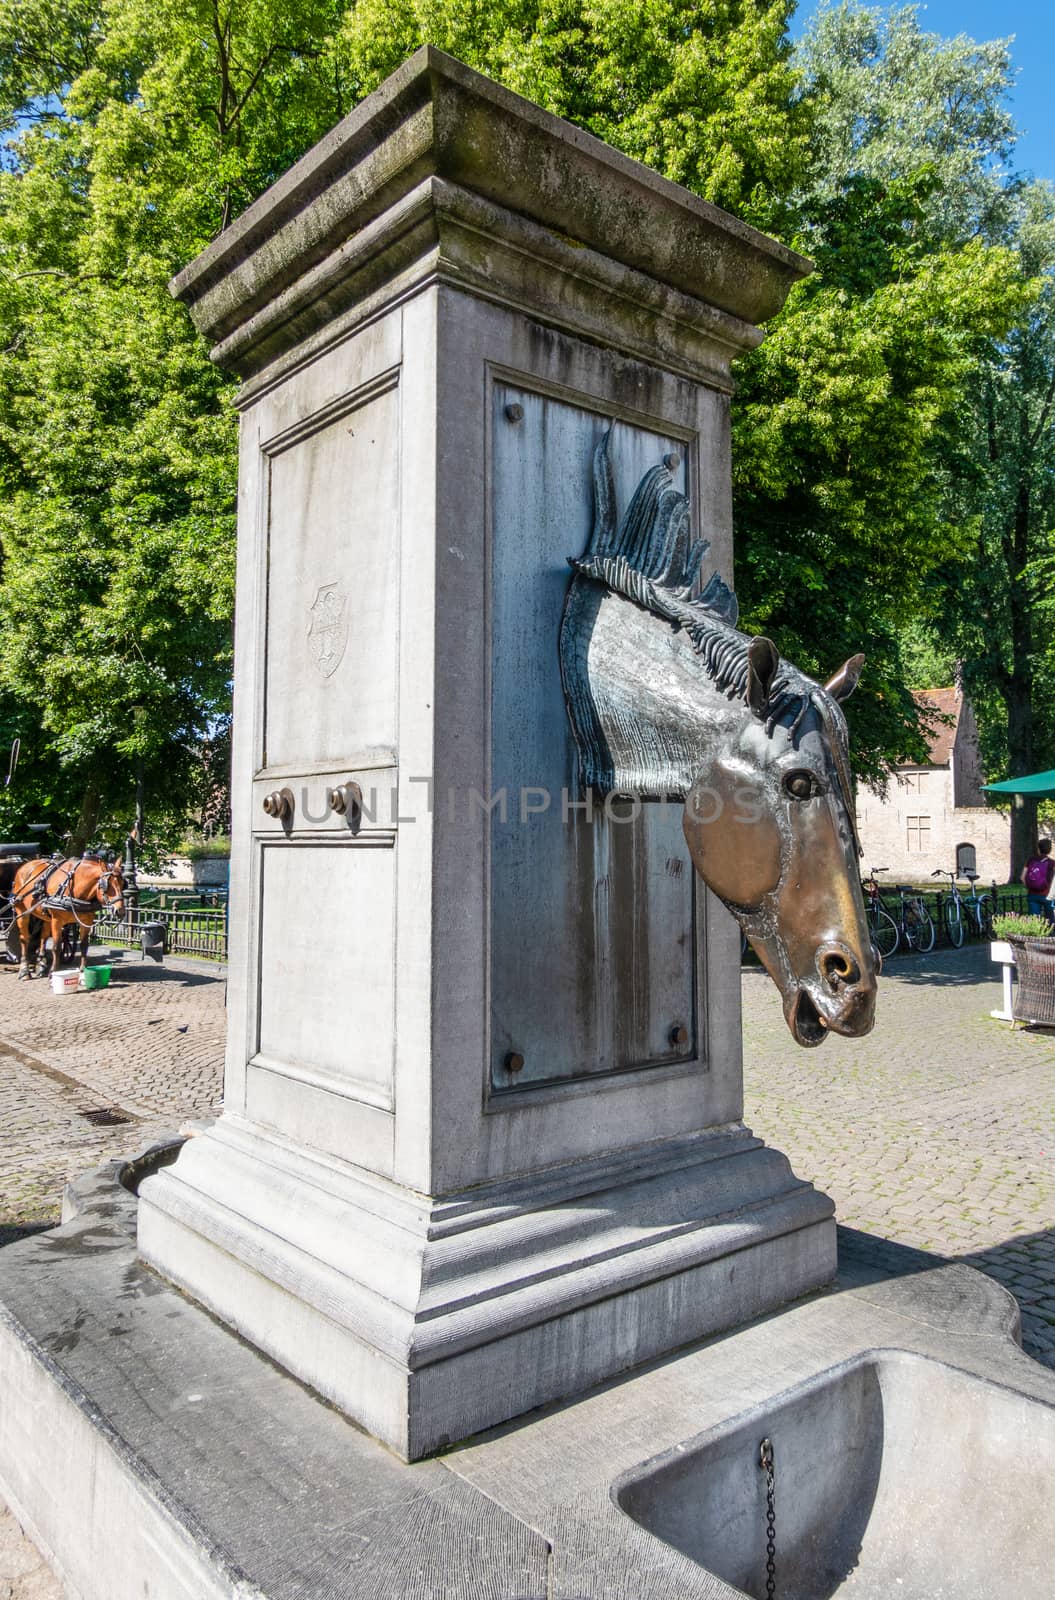 Bruges, Flanders, Belgium -  June 17, 2019: Gray stone water pump with horse head as faucet especially for horses of carriages near beguinage. Green foliage, brown horse in back.